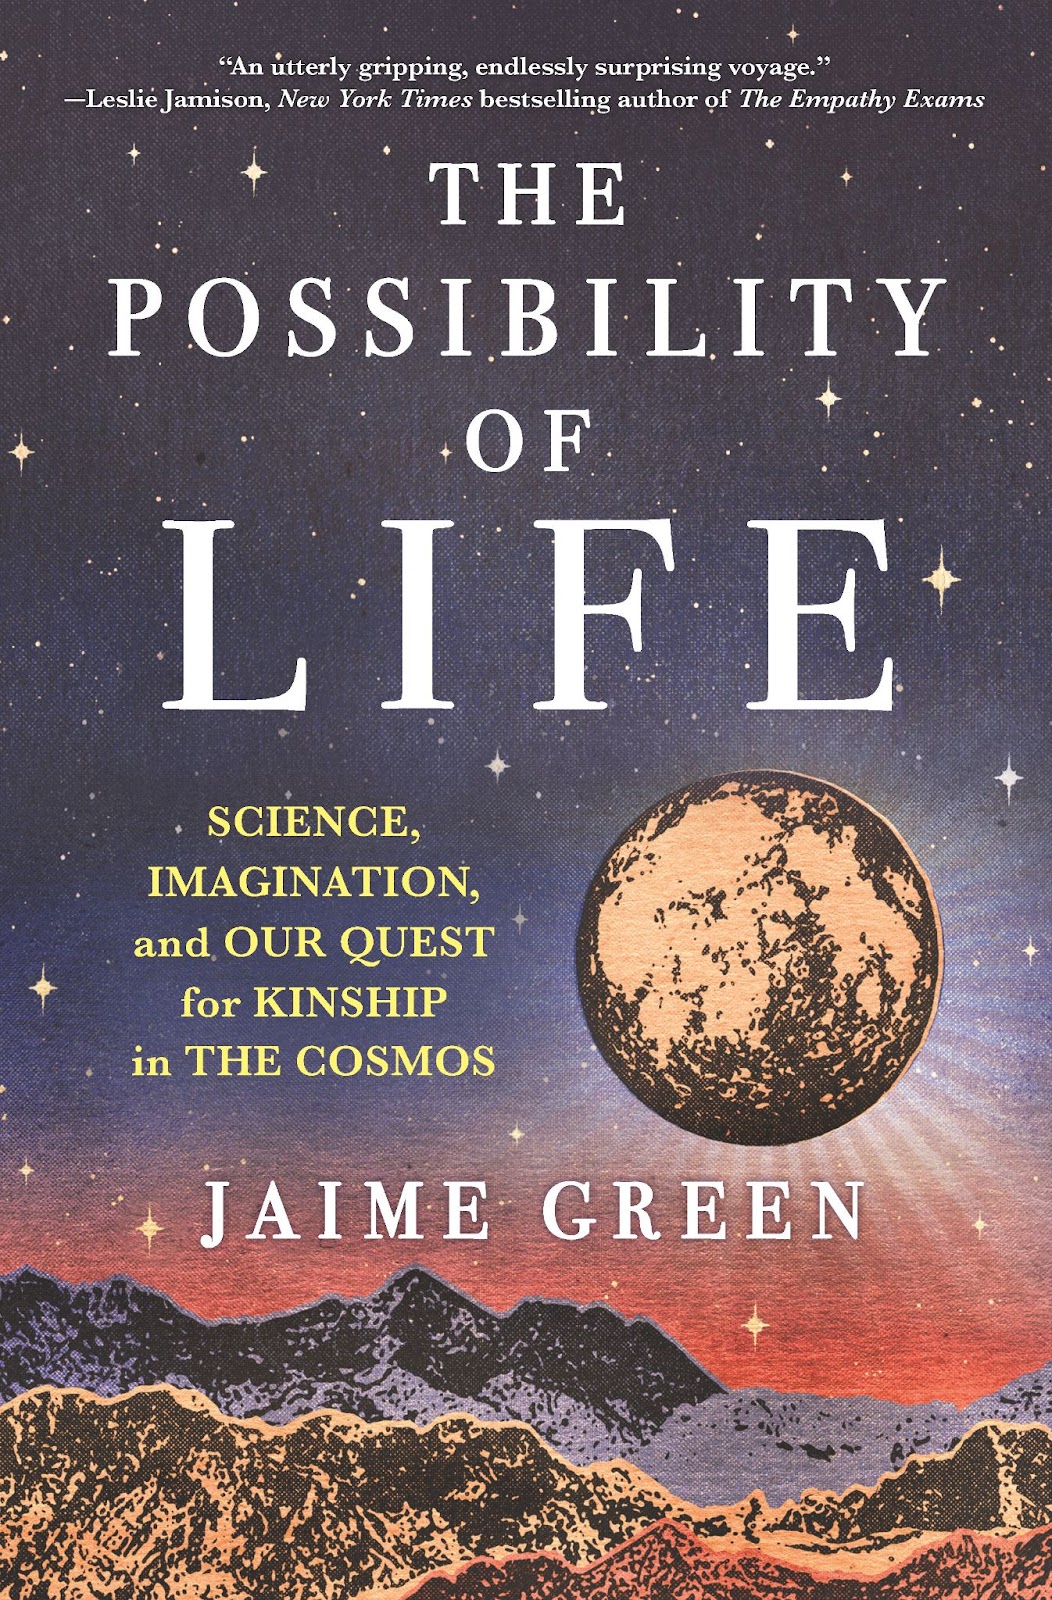 The cover of the book The Possibility of Life